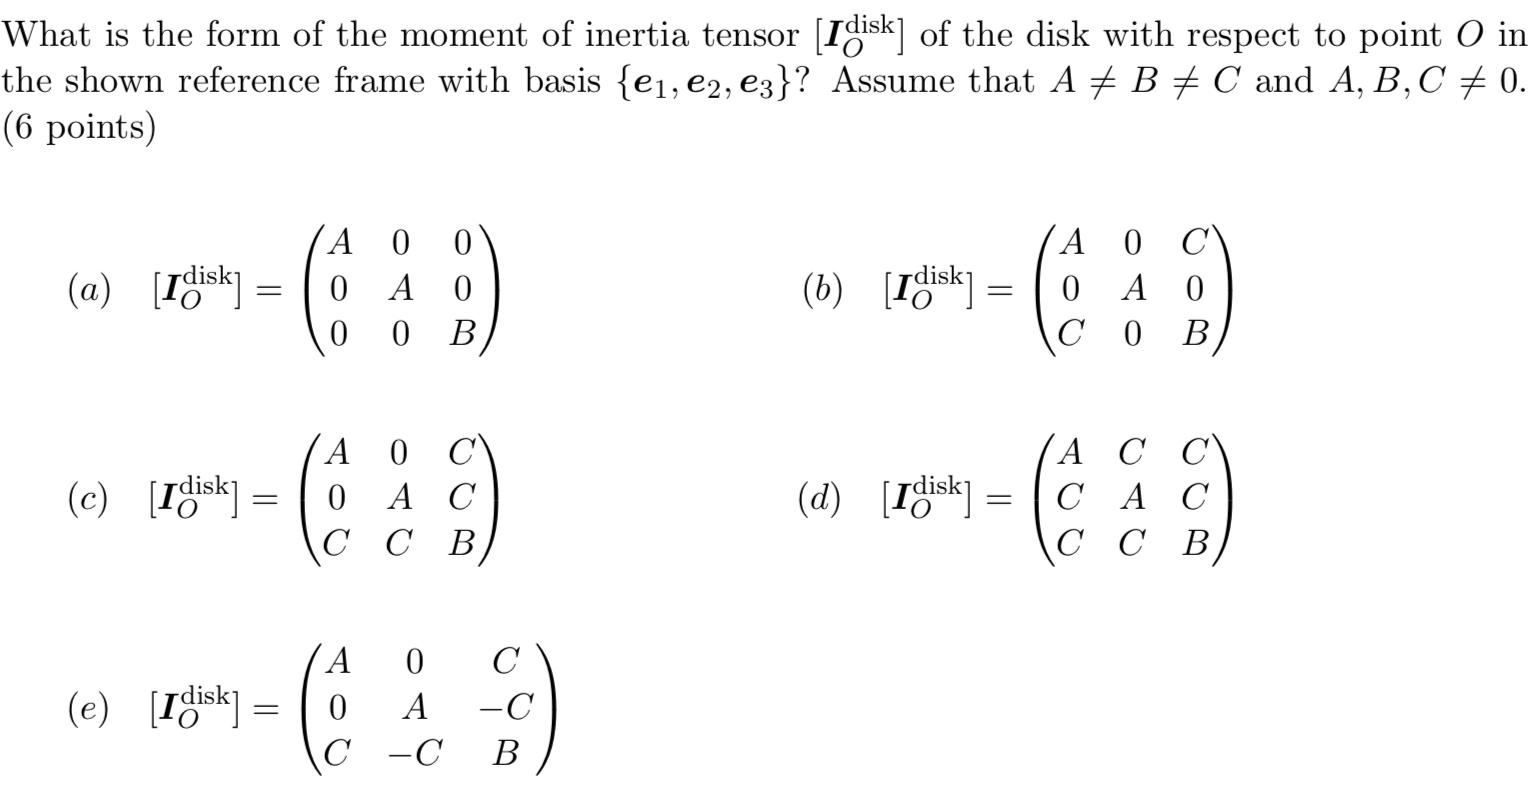 What is the form of the moment of inertia tensor [Idisk] of the disk with respect to point O in the shown